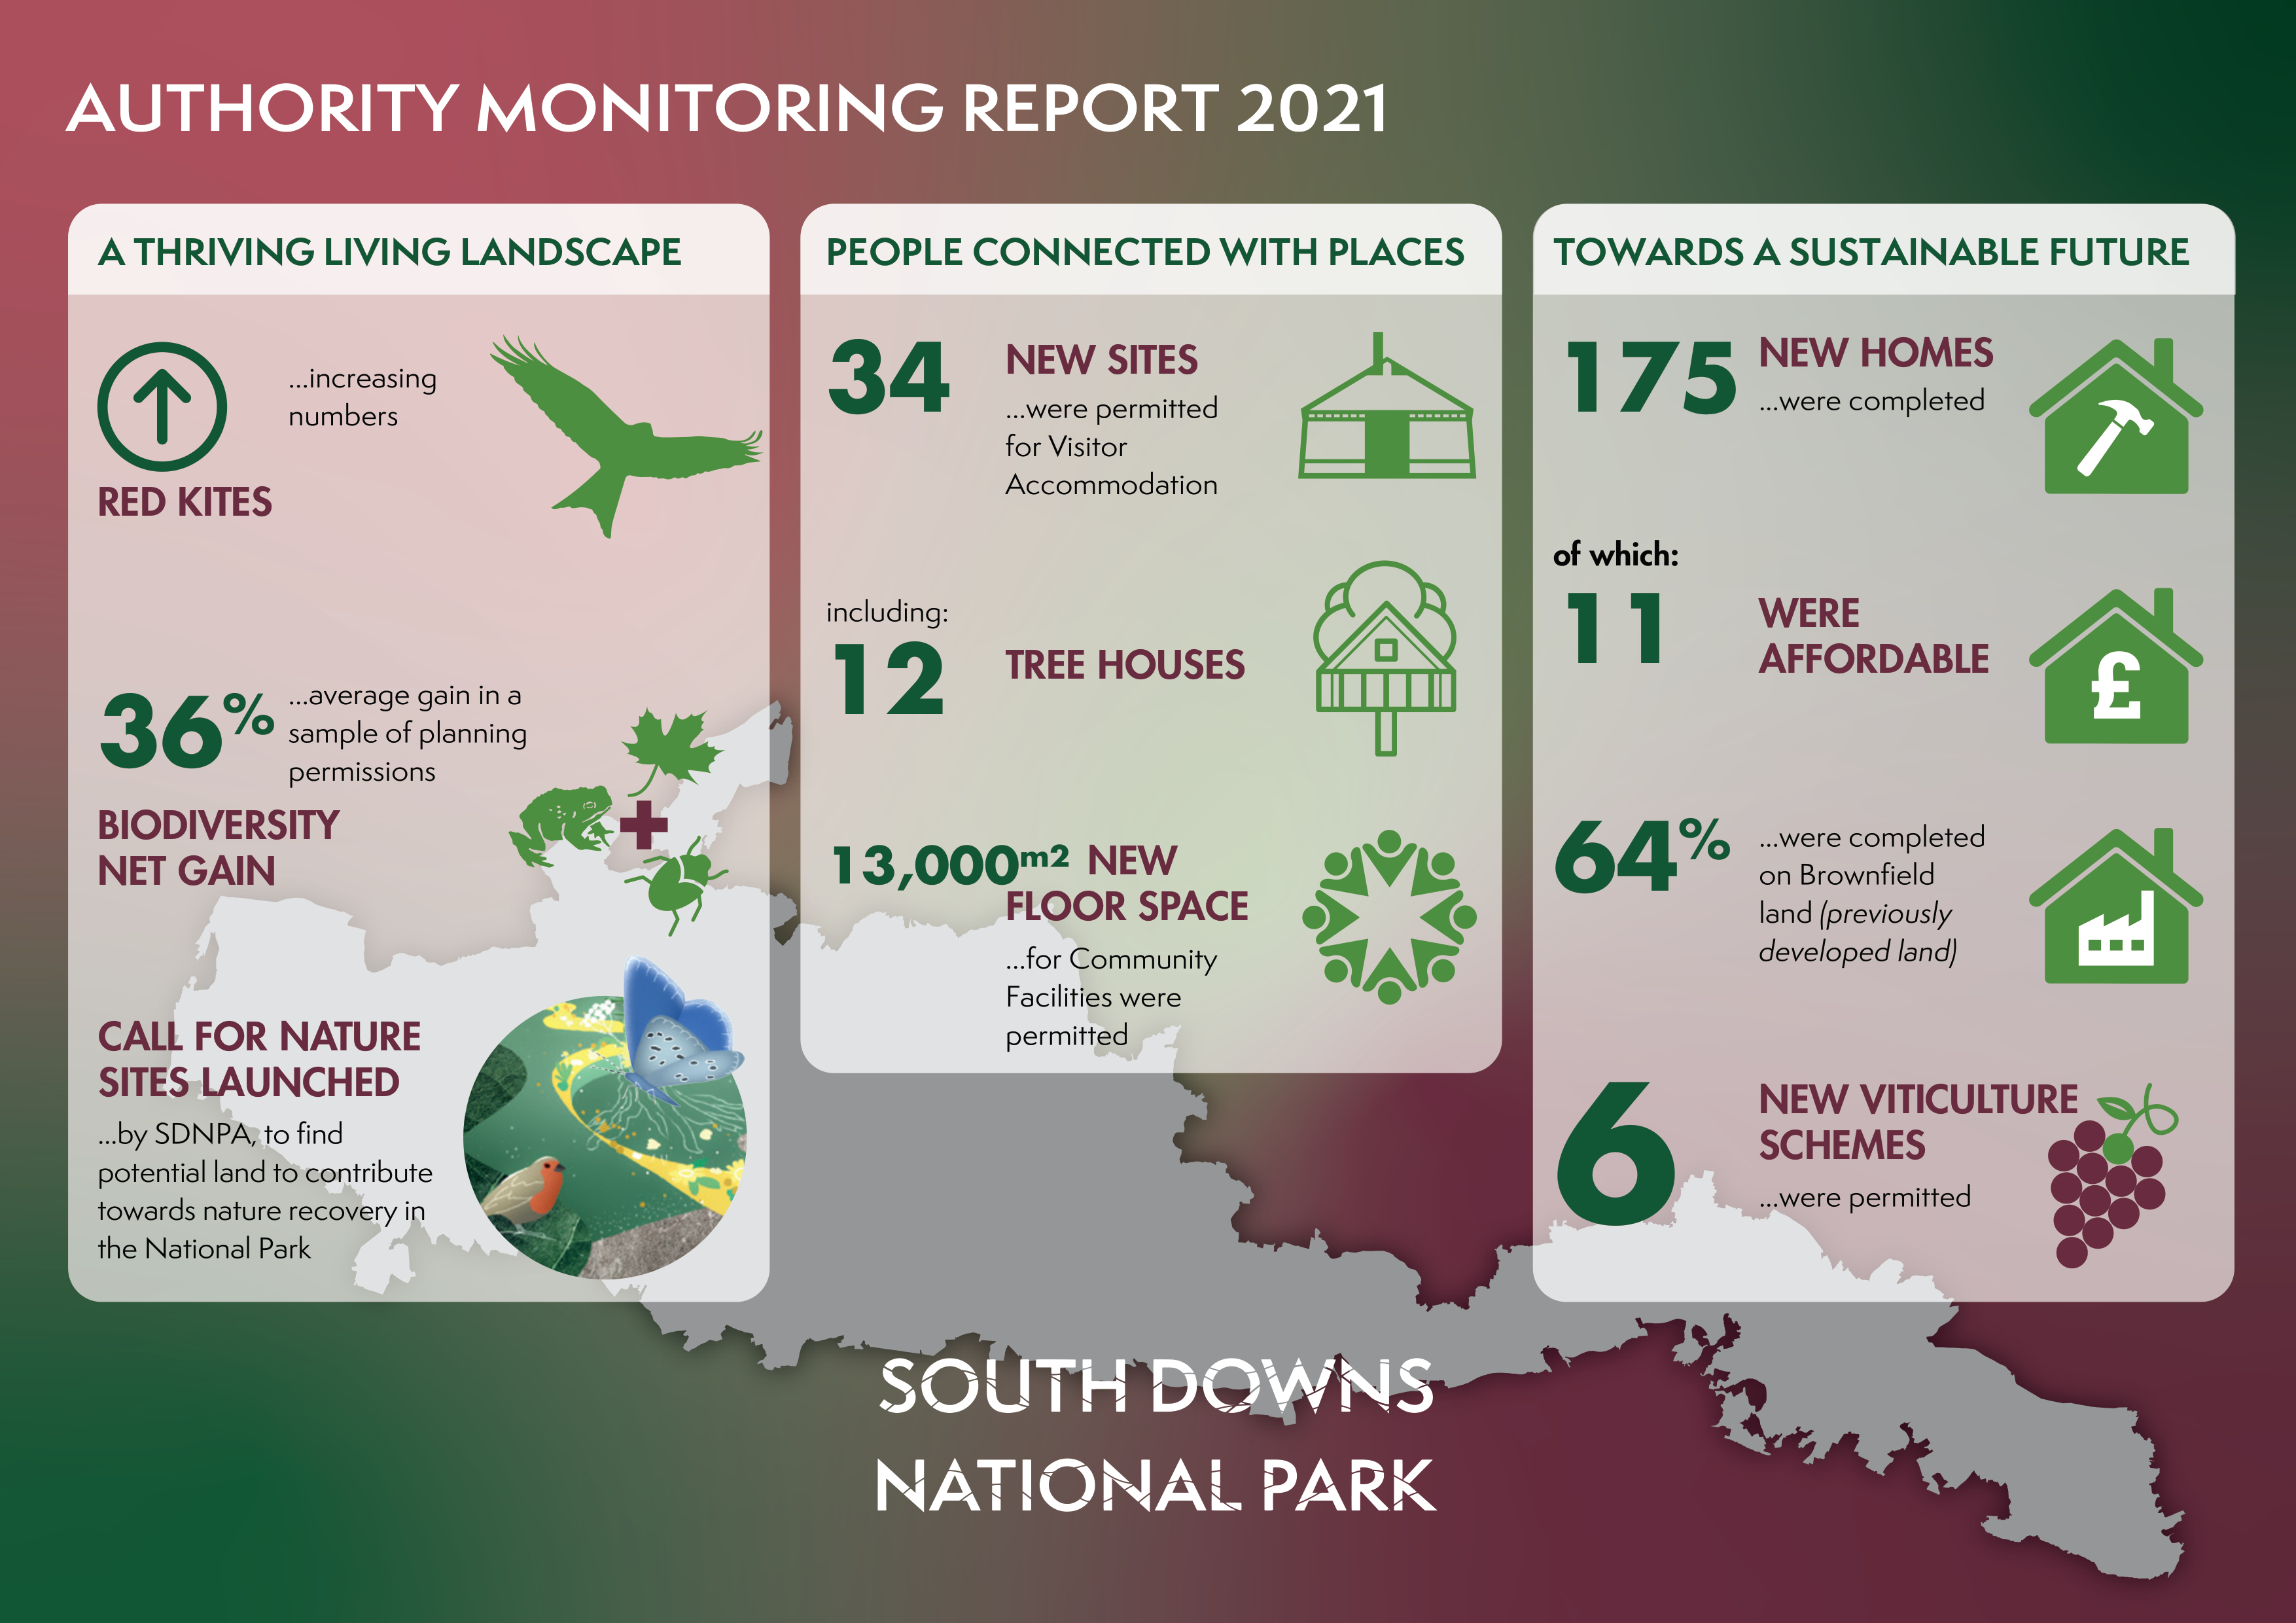 The Authority Monitoring Report infographic. From left to right, there are three columns titled: A Thriving Living Landscape; People Connected with Places; and, Towards a Sustainable Future. Under the title 'A Thriving Living Landscape', achievements include an increase in the number of red kites in the National Park, a 36% increase in Biodiversity Net Gain and the call for nature sites to help nature recover. Under the header 'People Connected with Places', achievements include the approval of 34 new sites for visitor accommodation which includes 12 tree houses; this all amounts to 13,000 square metres of new visitor accommodation. Under the header titled 'Towards a Sustainable Future' achievements include 175 new homes completed of which 11 were affordable, 64% were on brownfield land (used in previous development) and six new viticulture schemes were approved. 